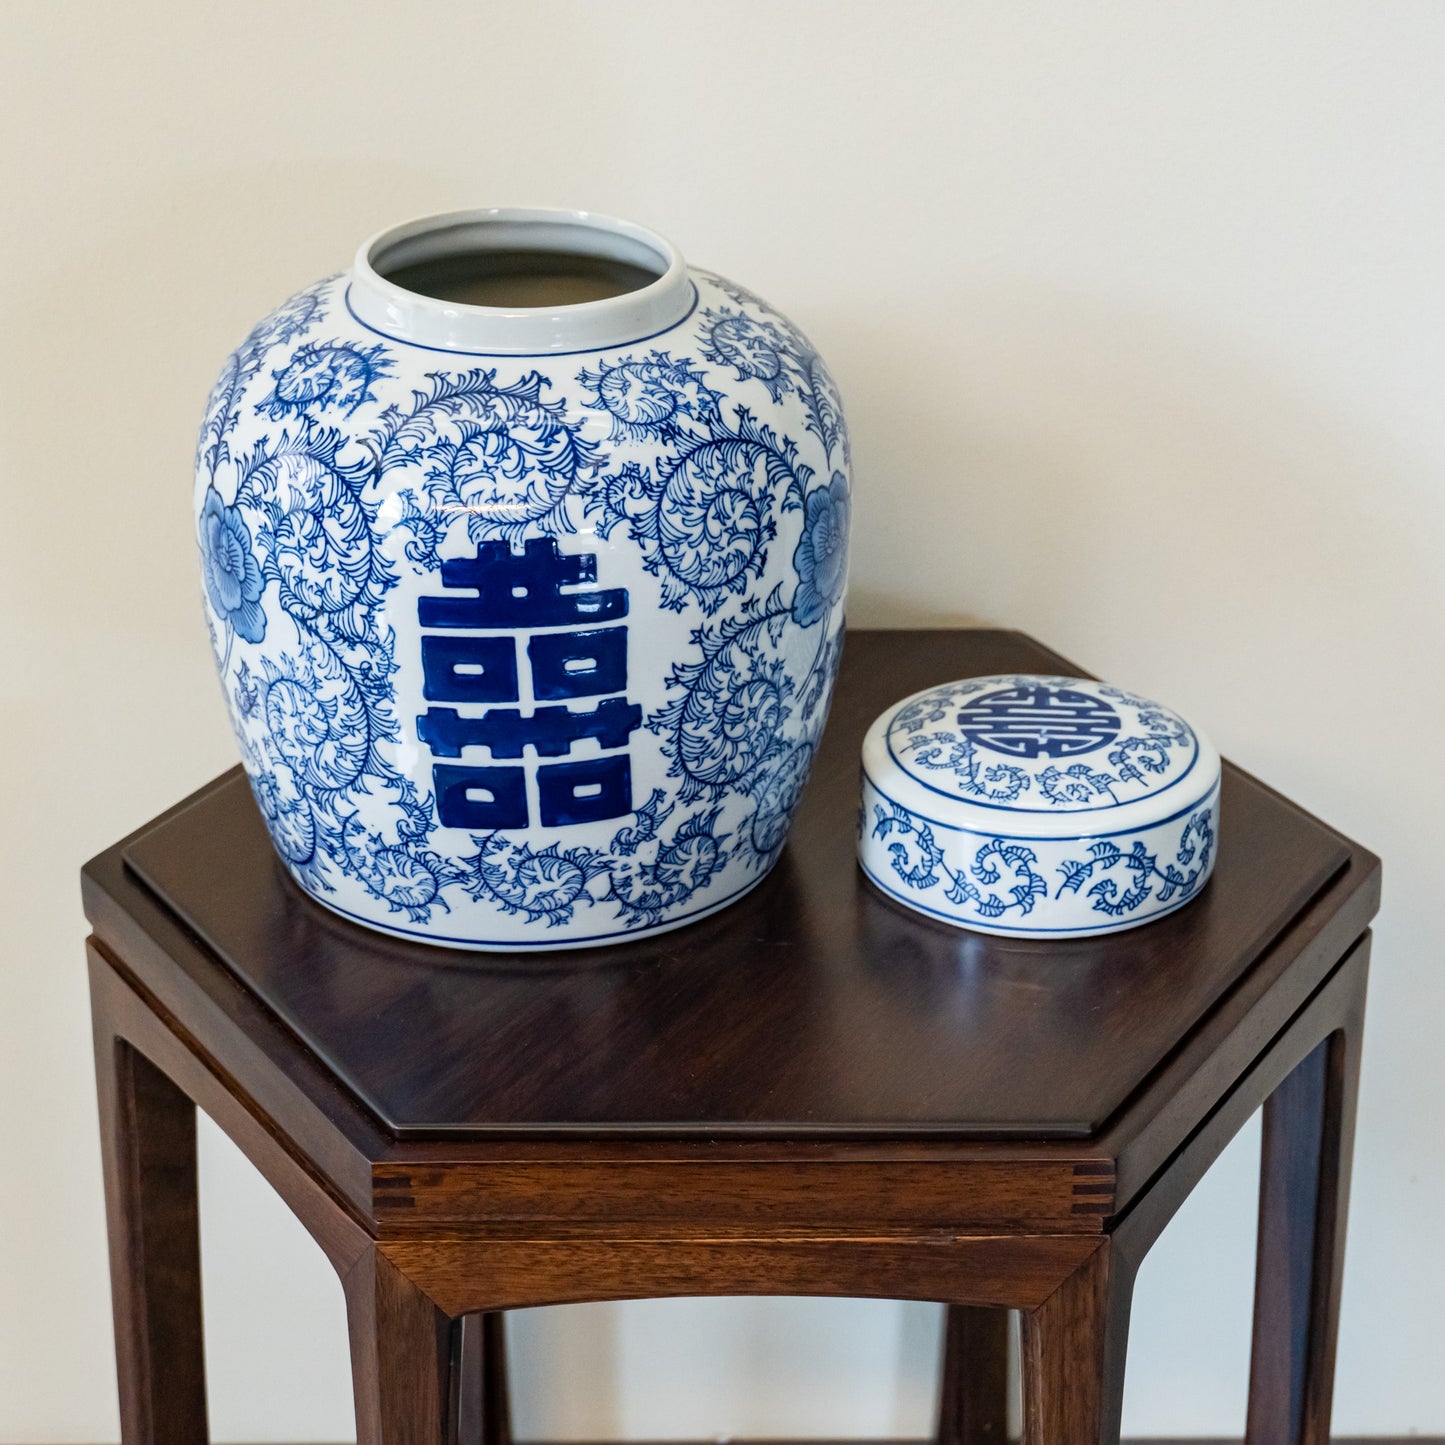 Blue & White Double Happiness Jar with Lid - Large Traditional Chinese Porcelain Vase - Luxurious Home Décor and Collectible